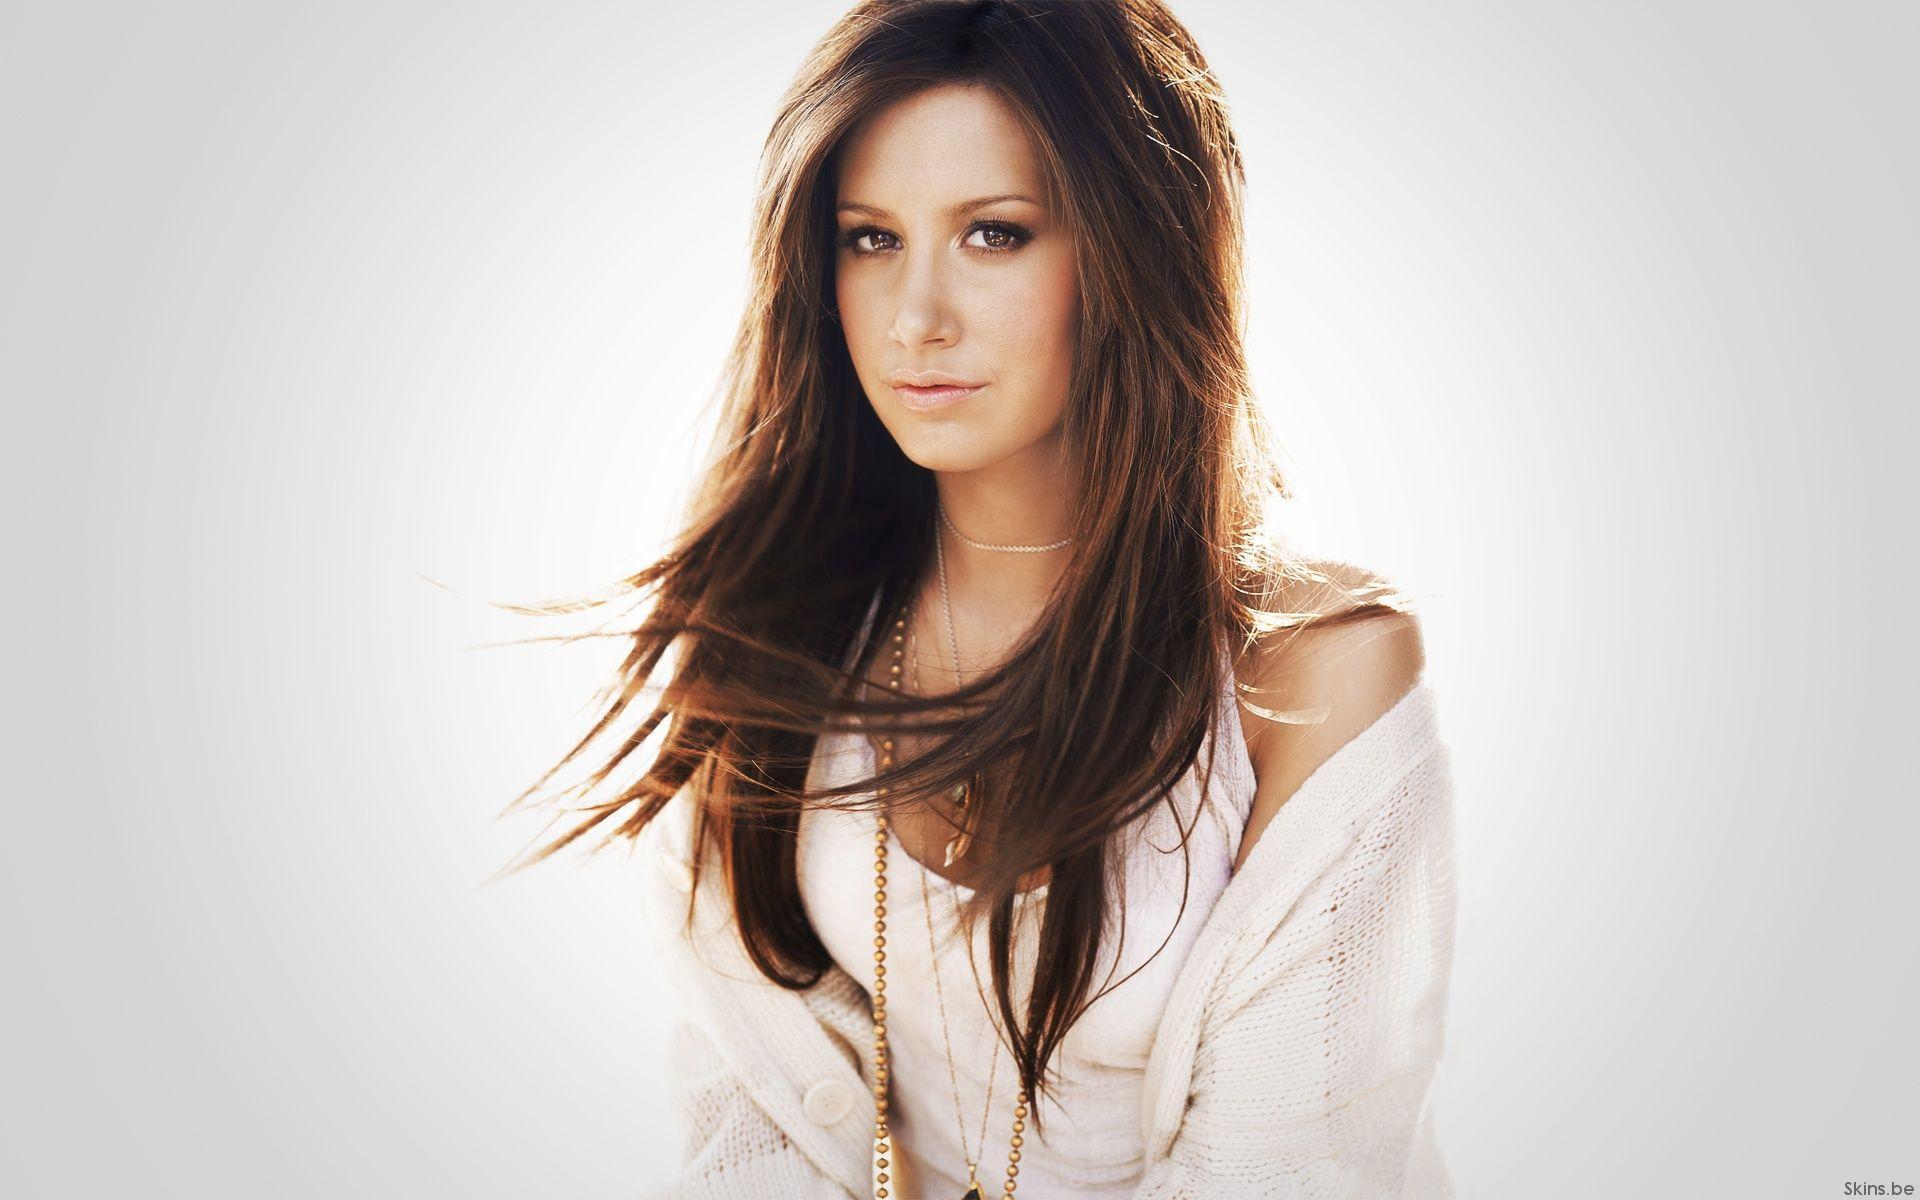 Ashley Tisdale HD Wallpaper high quality and definition